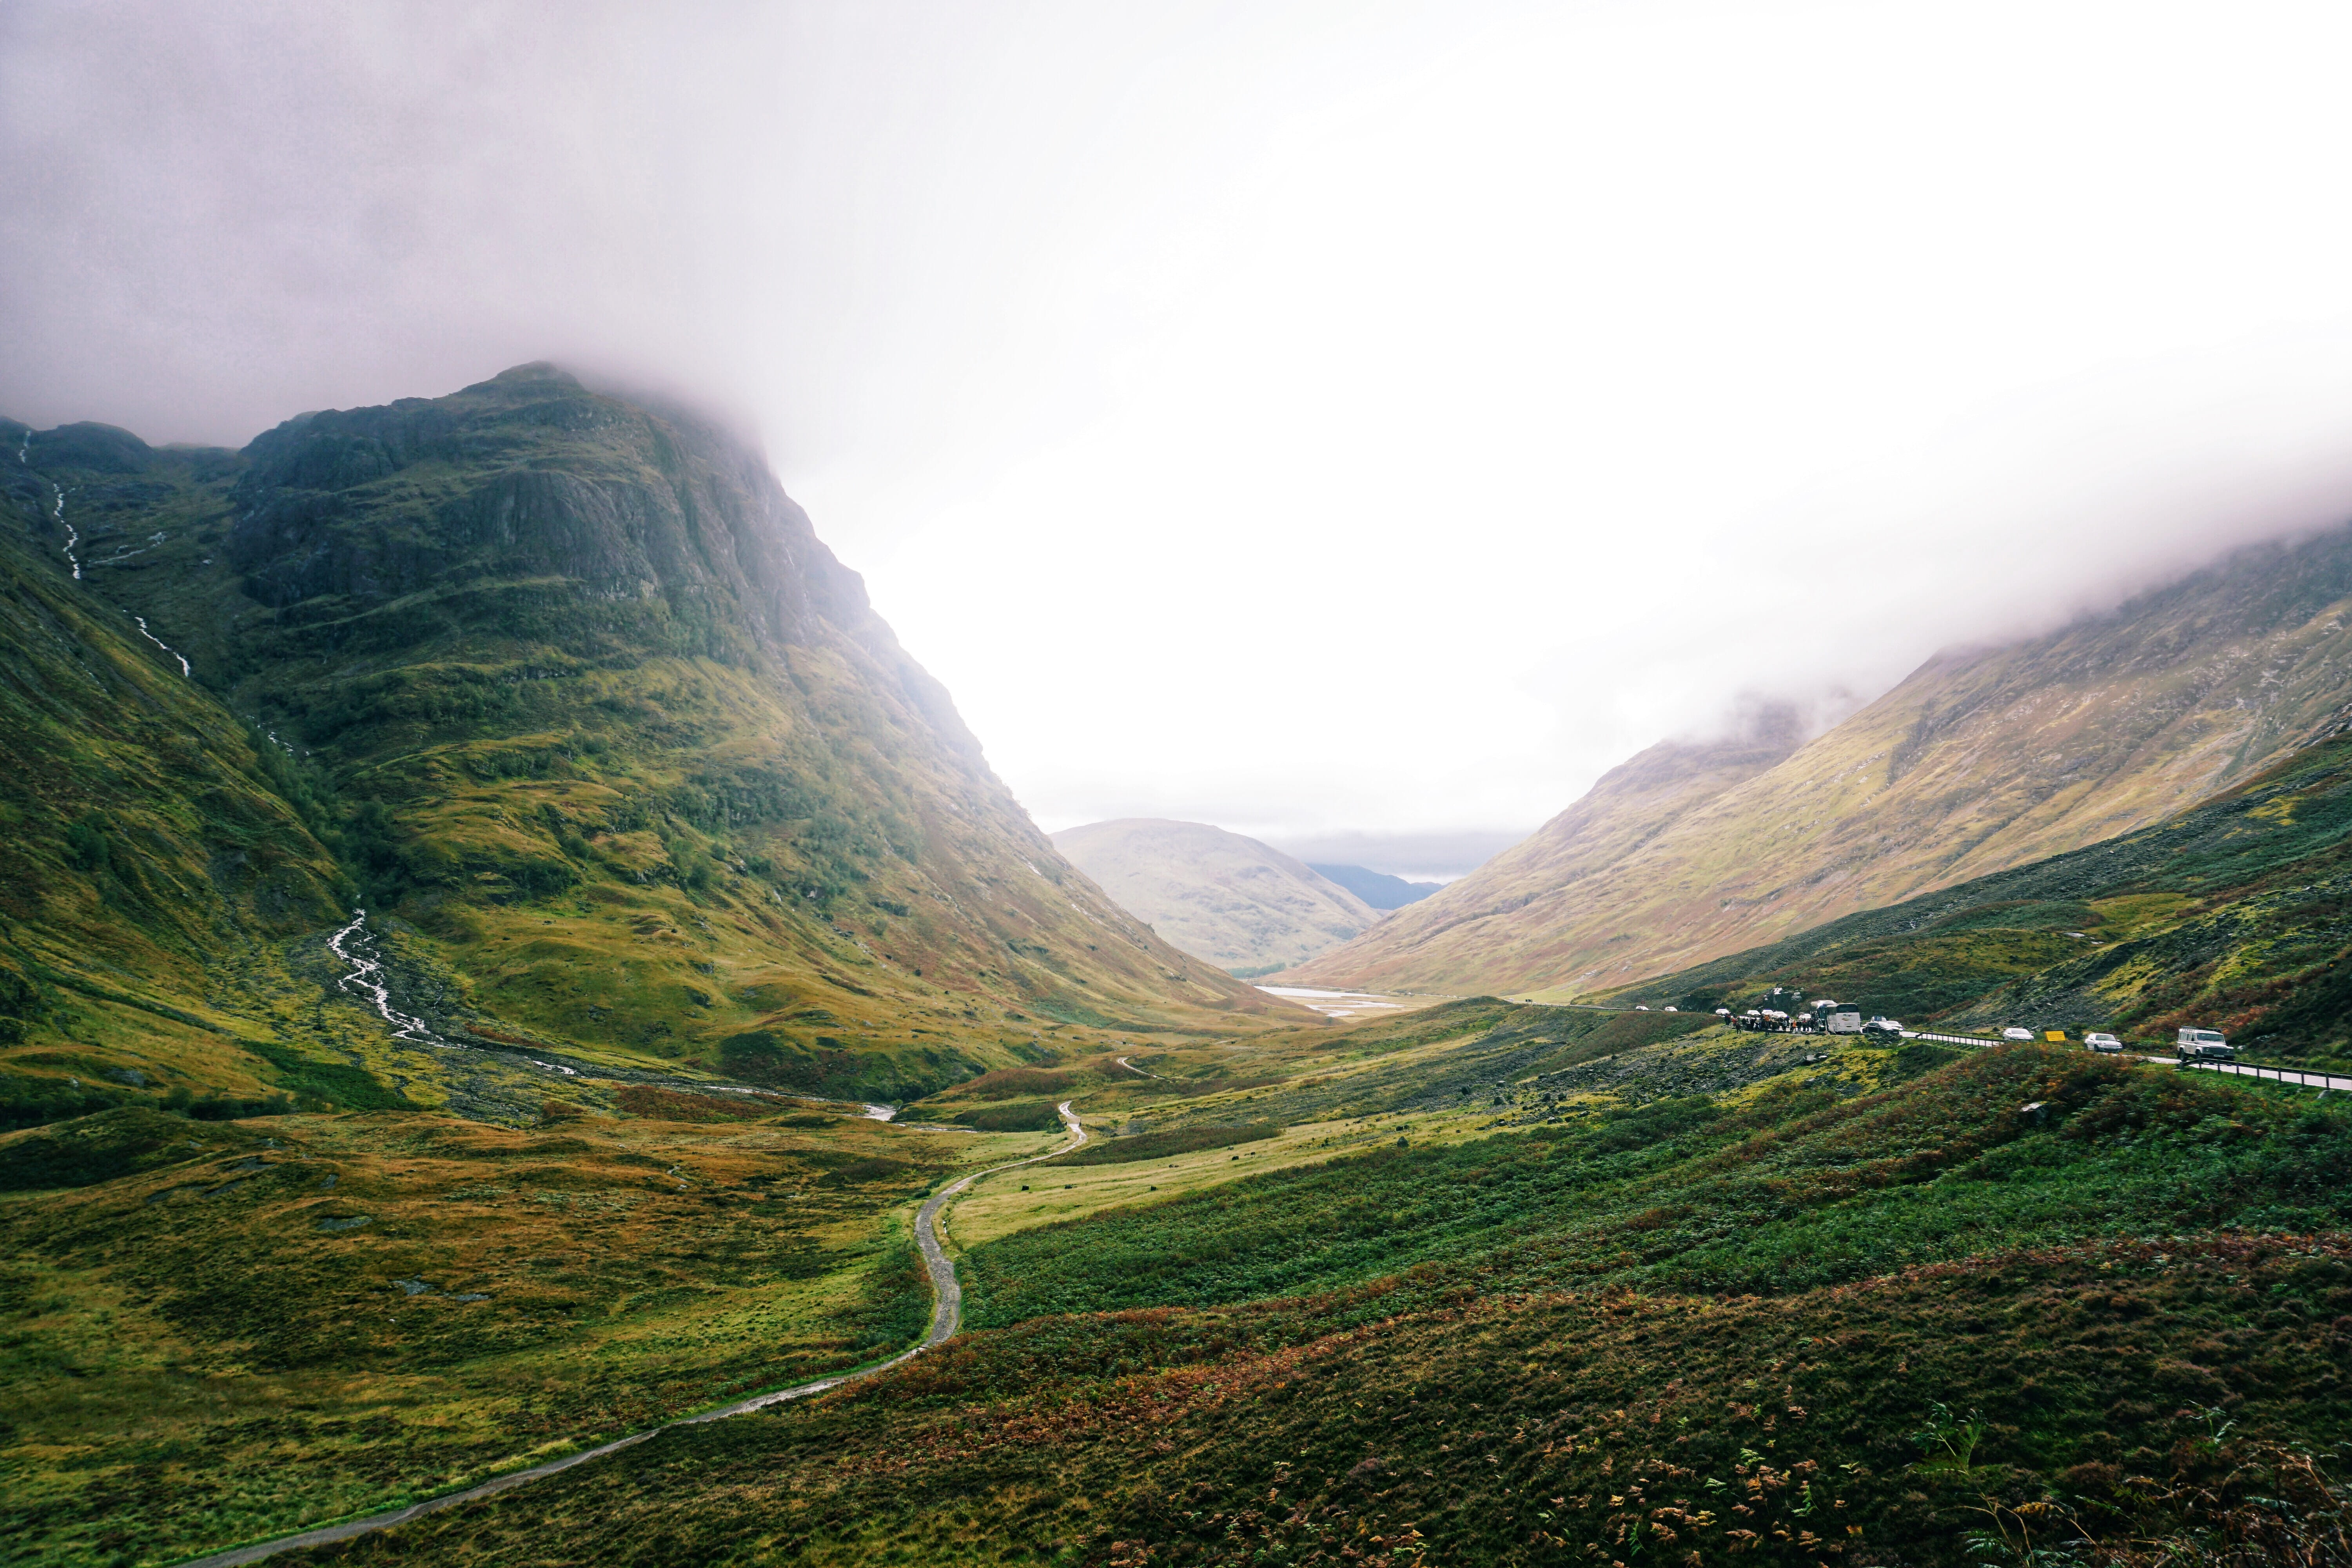 Scotland is one of the best places in the UK for trail running